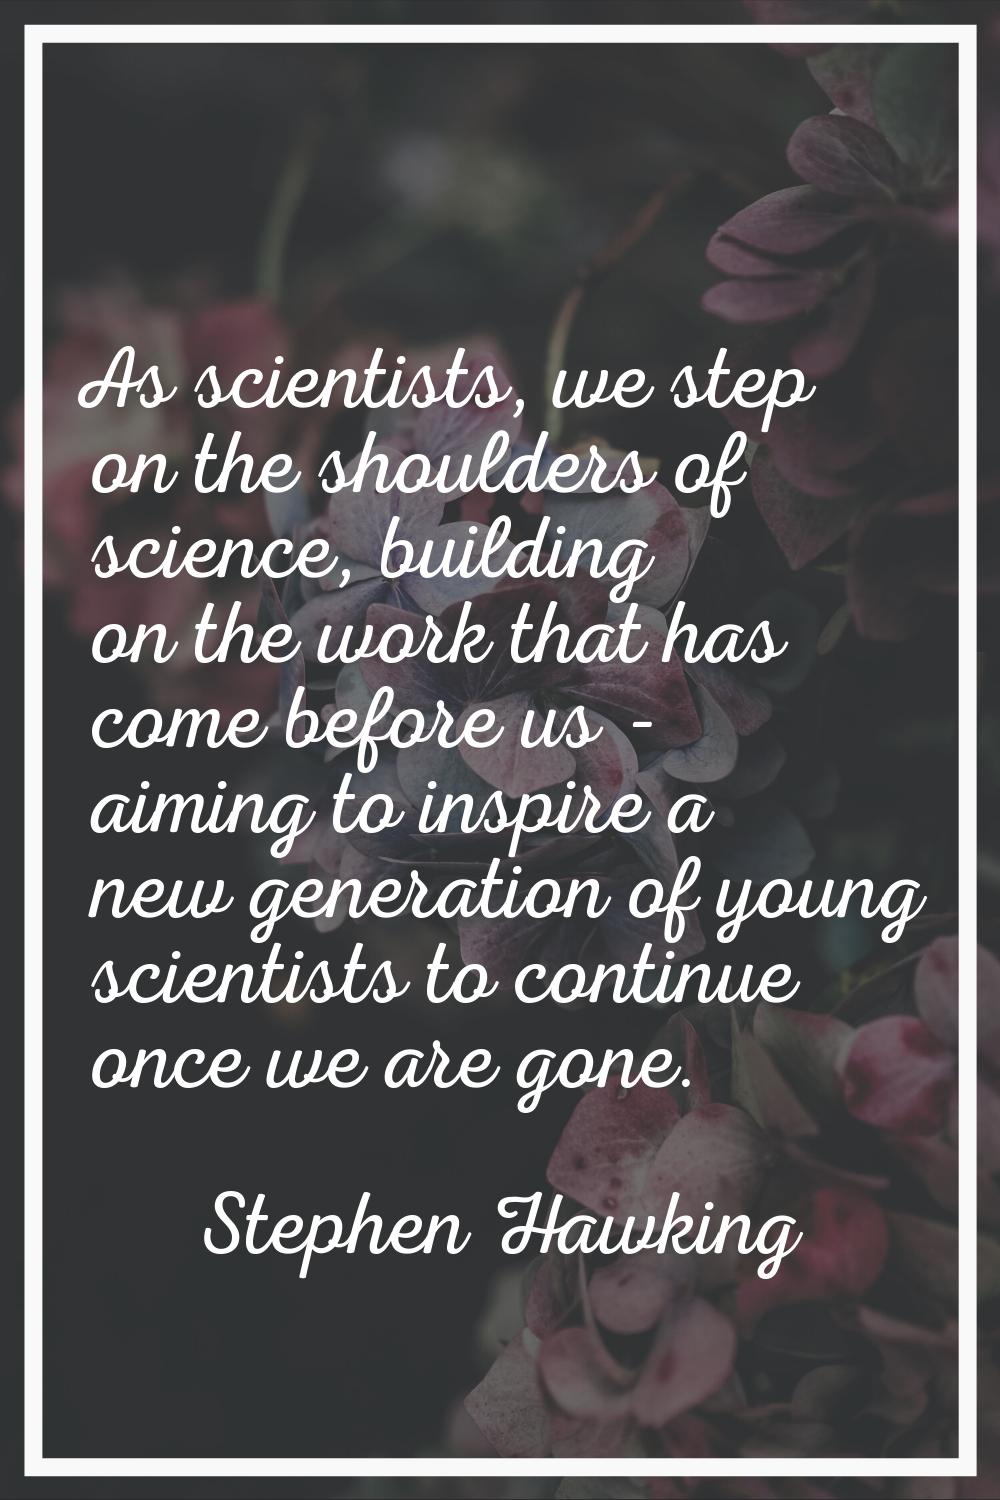 As scientists, we step on the shoulders of science, building on the work that has come before us - 